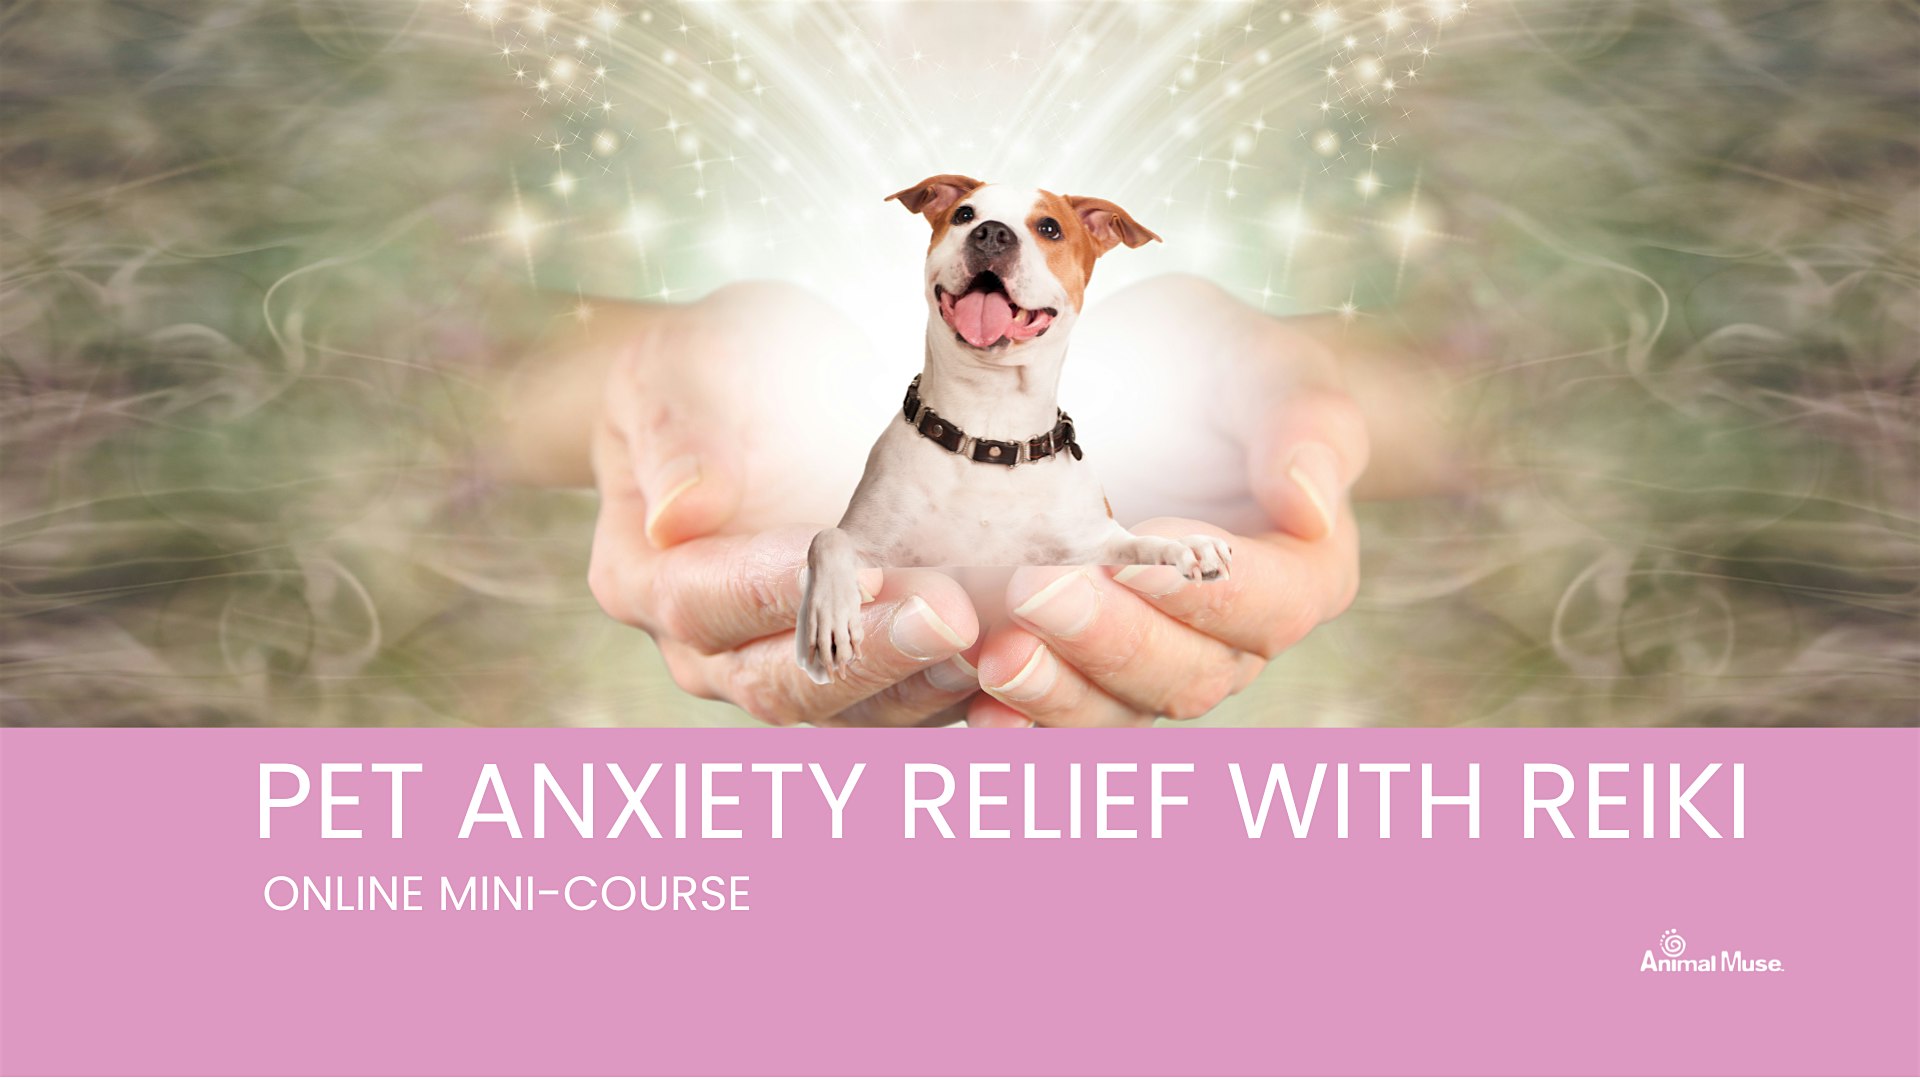 PET ANXIETY RELIEF WITH REIKI